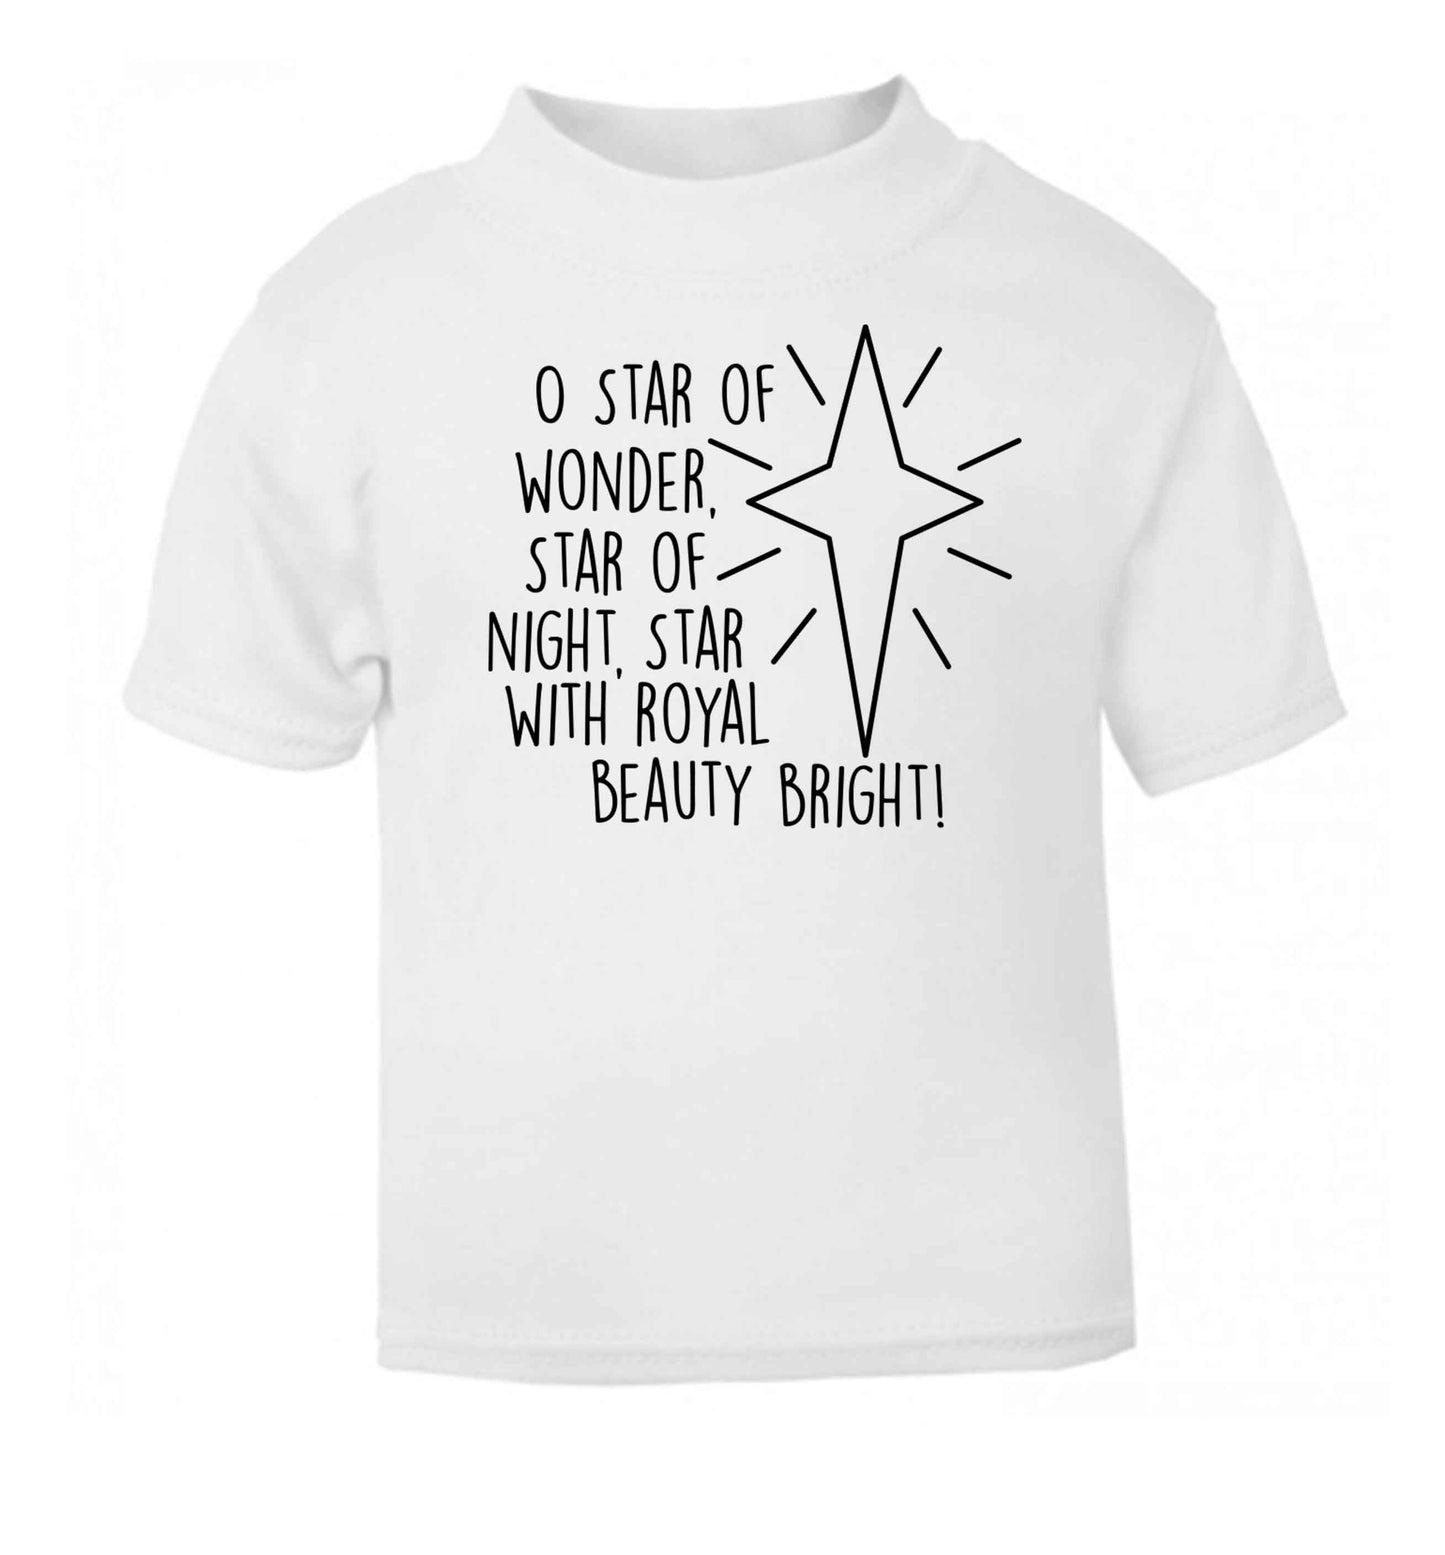 Oh star of wonder star of night, star with royal beauty bright white baby toddler Tshirt 2 Years